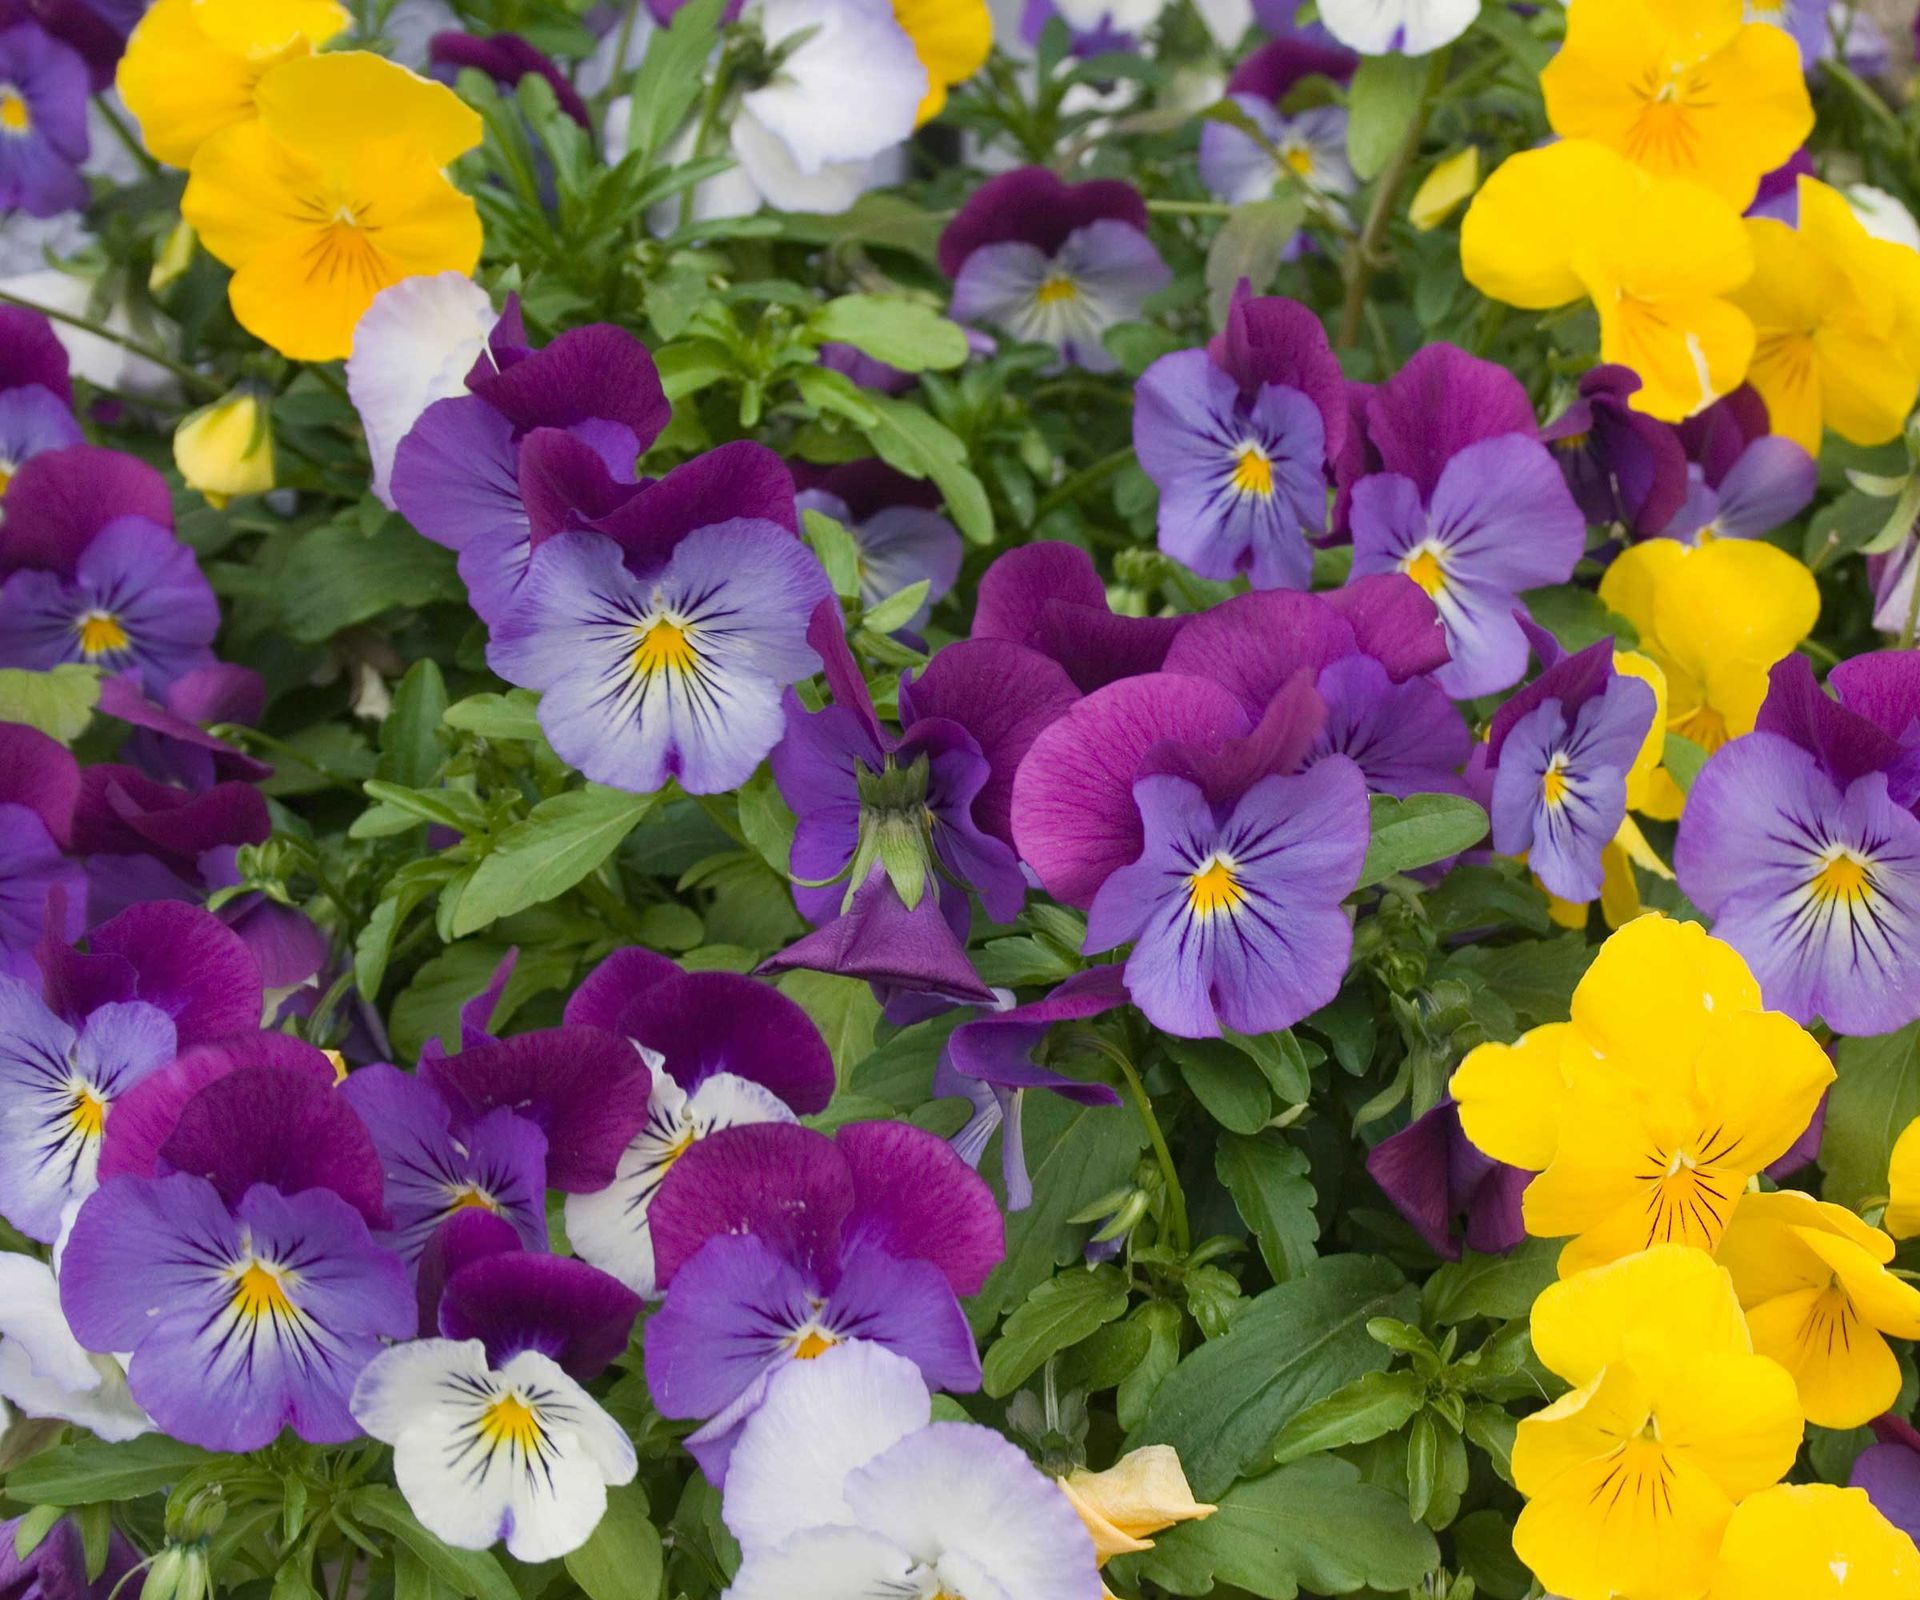 How to propagate pansies and violas: 3 easy ways